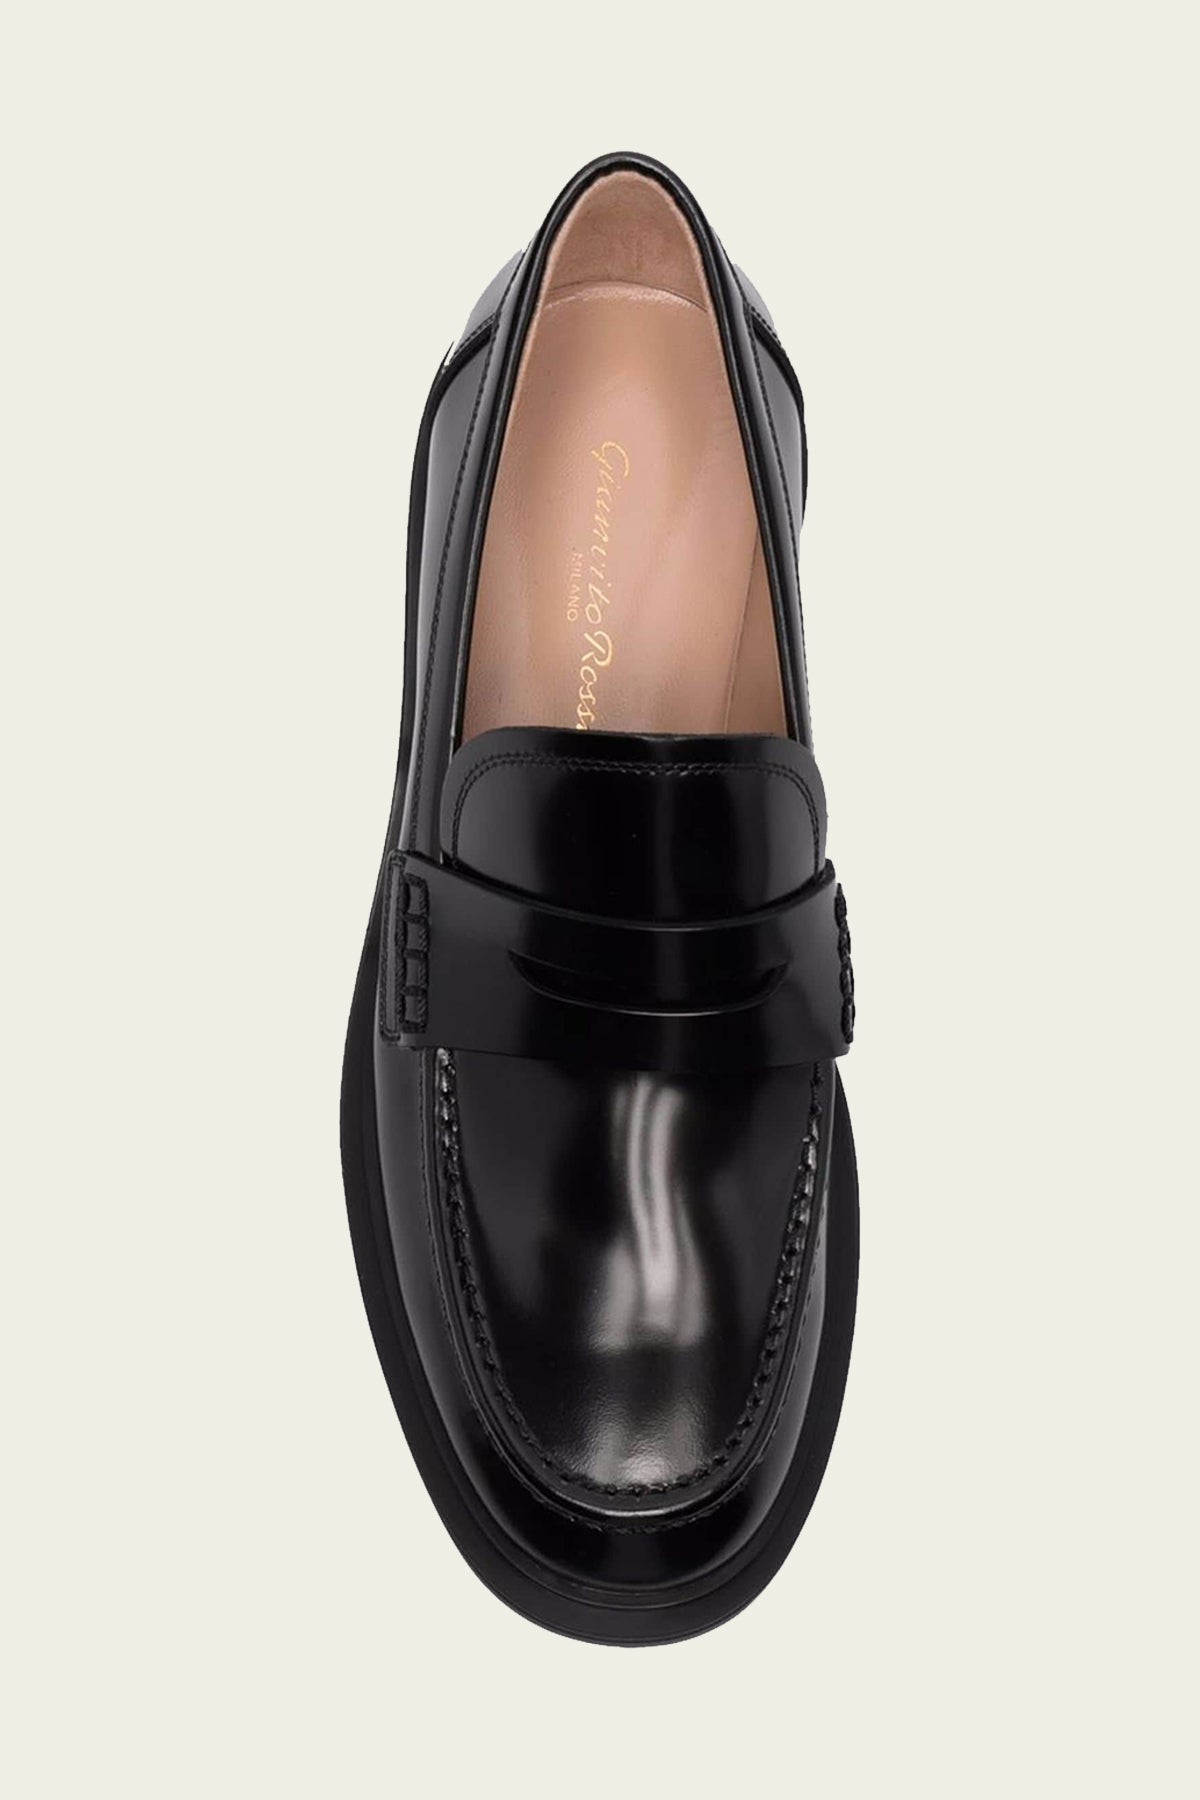 Harris Leather Loafers in Black - shop-olivia.com